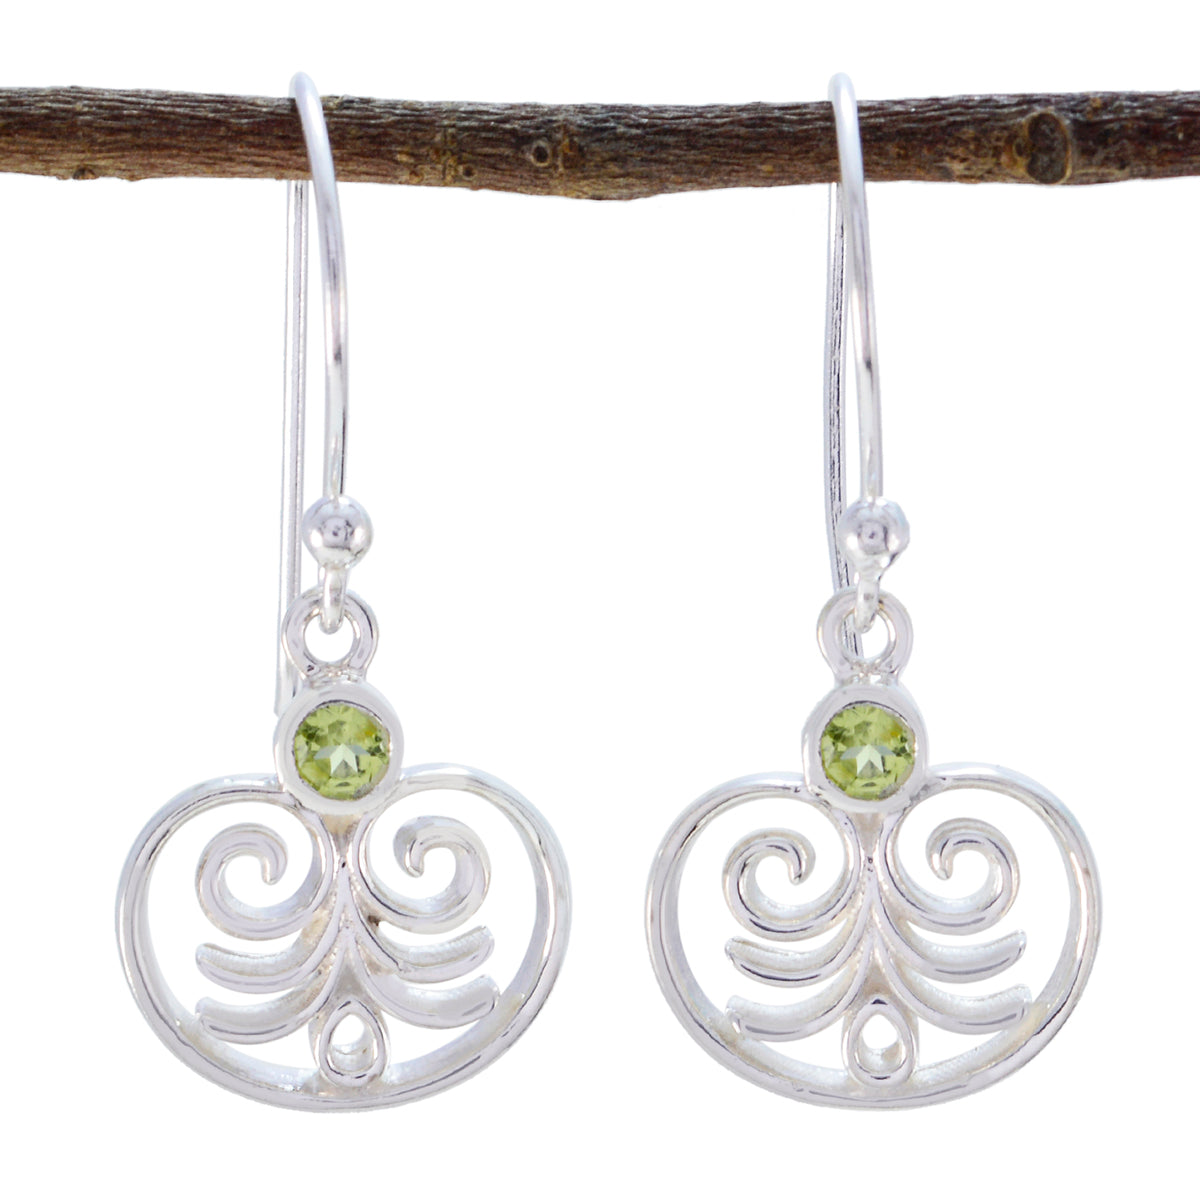 Riyo Good Gemstones round Faceted Green Peridot Silver Earring gift for easter Sunday